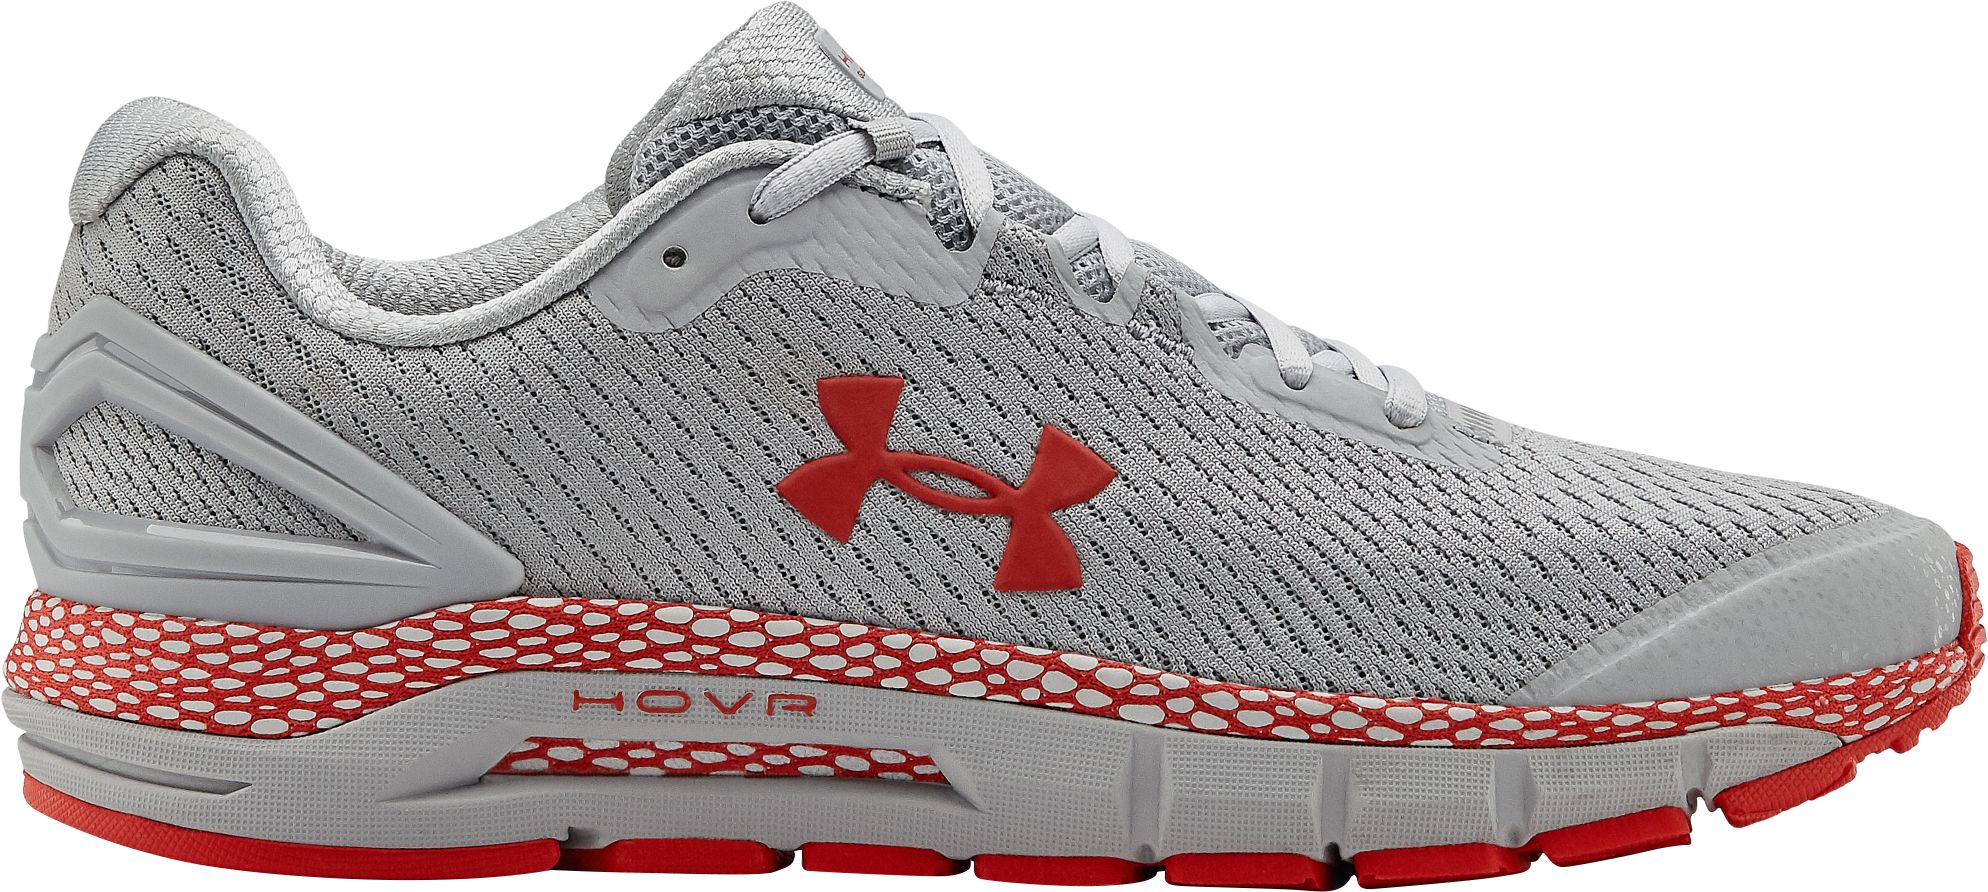 under armour hovr training shoes